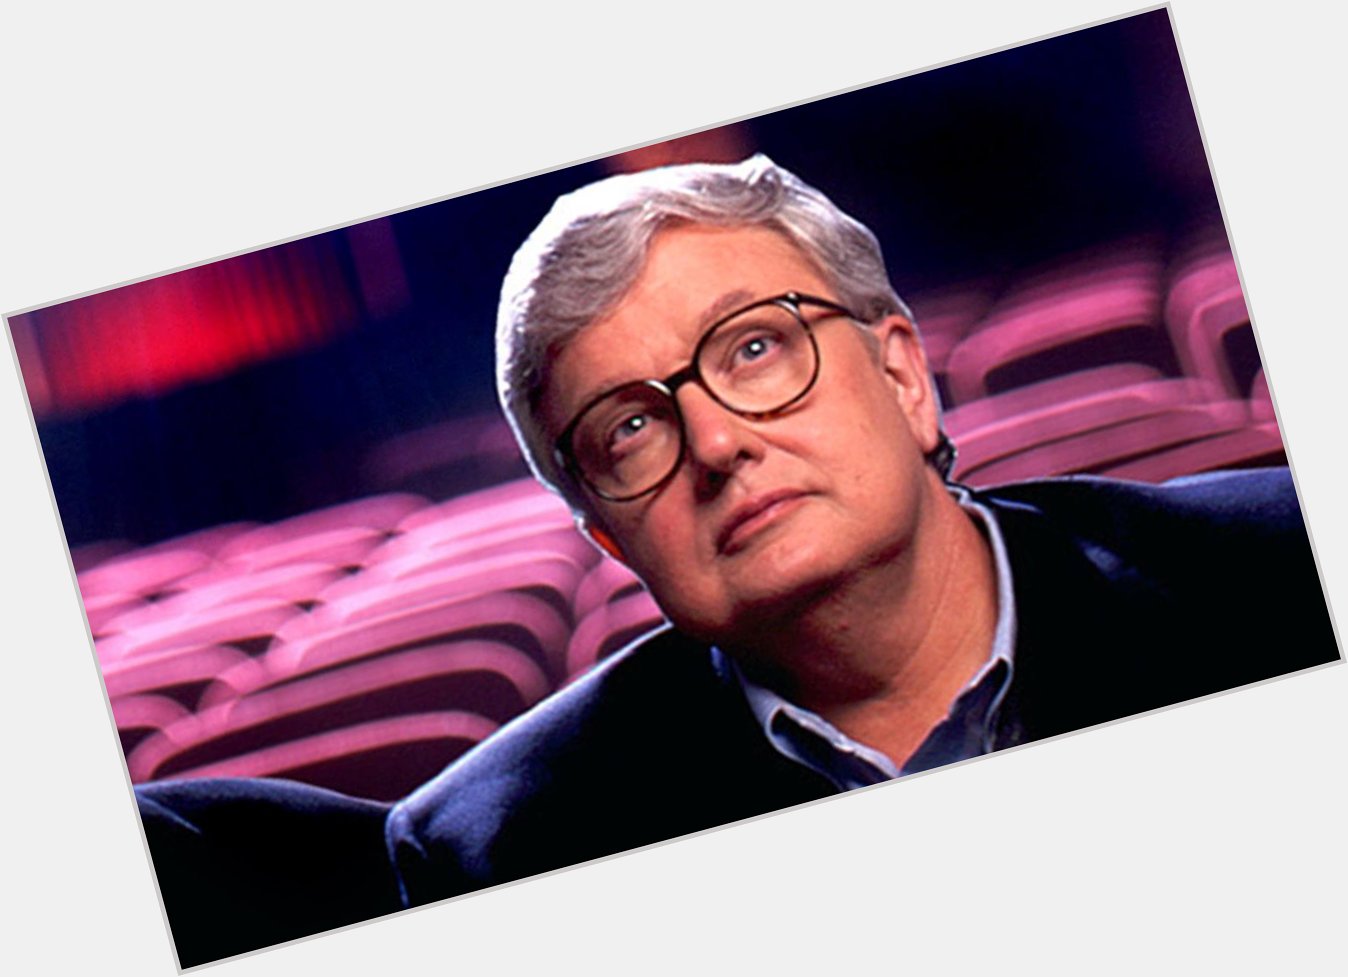 Happy birthday to the late Roger Ebert. He\s missed dearly by film fans everywhere. 